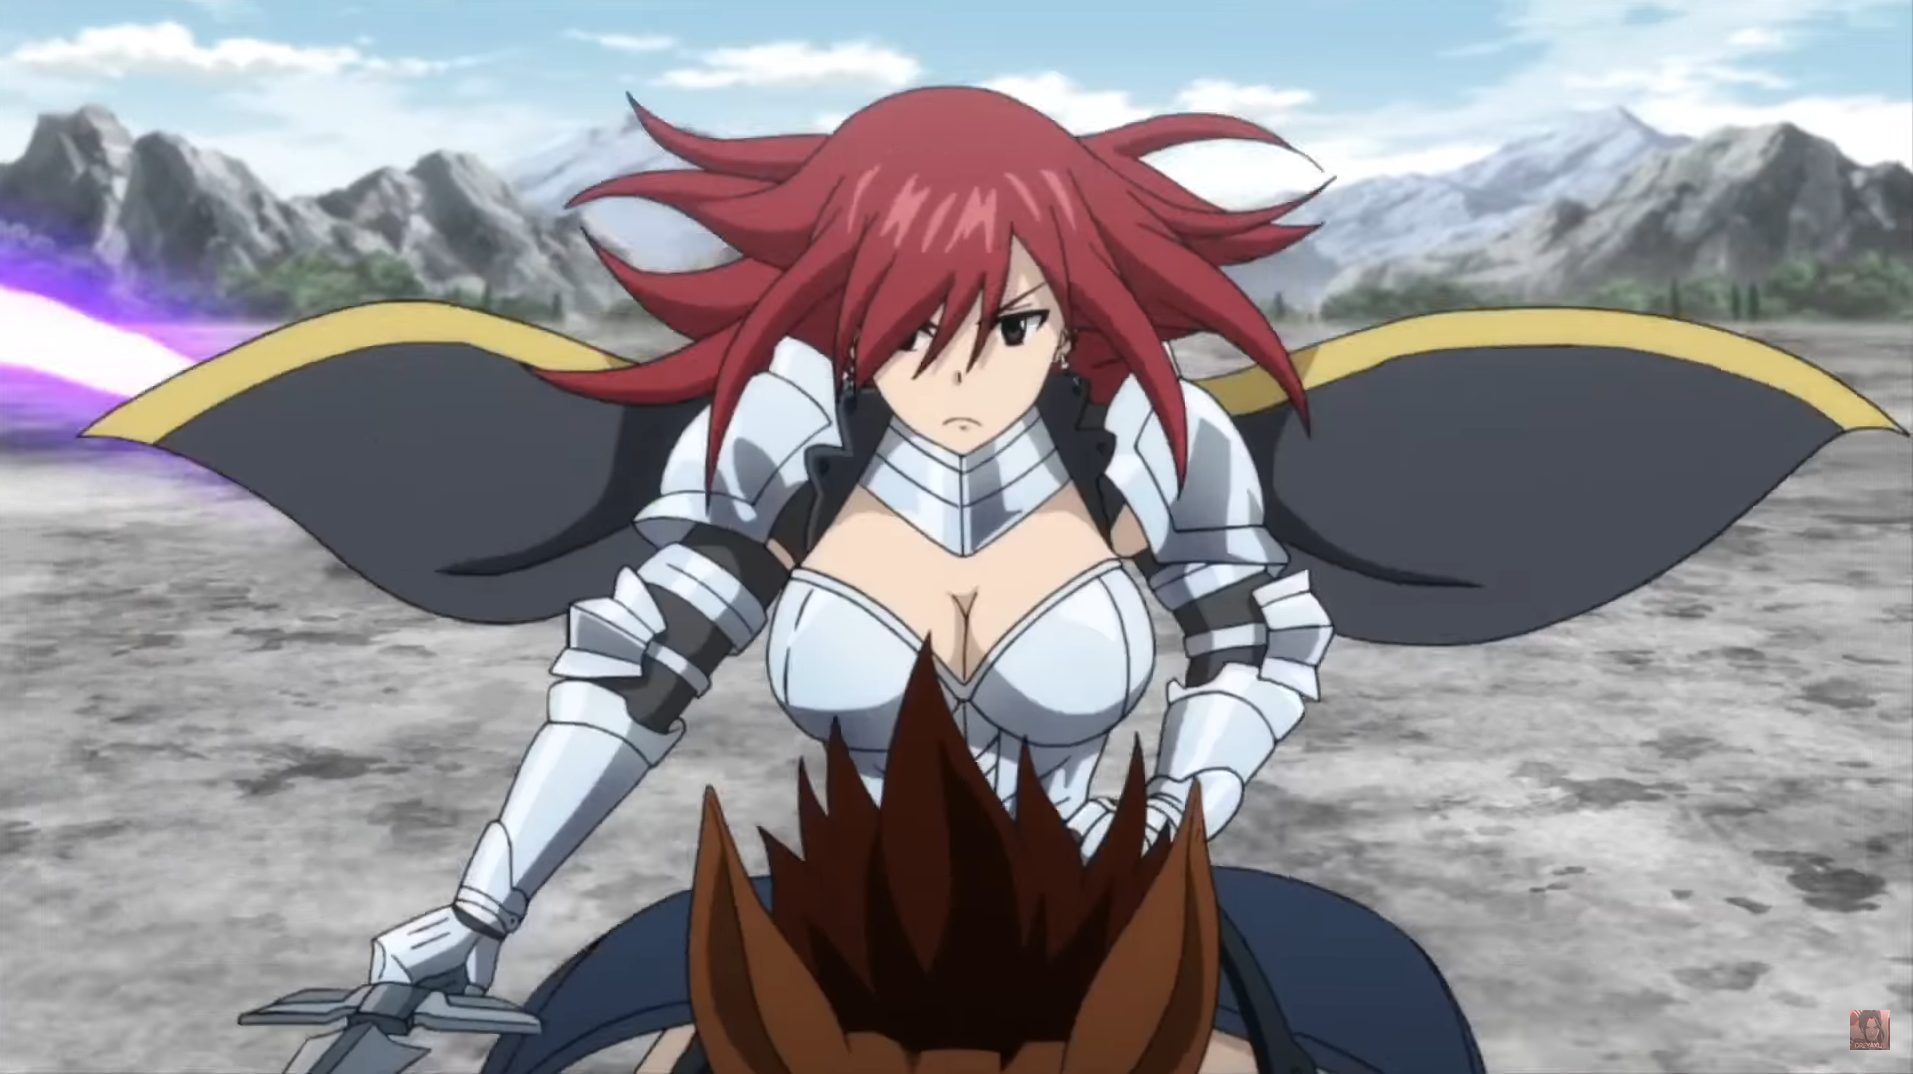 Erza Scarlet from Fairy Tail

Erza, despite having a reserved manner, has shown to have little timidity and an unusual viewpoint.